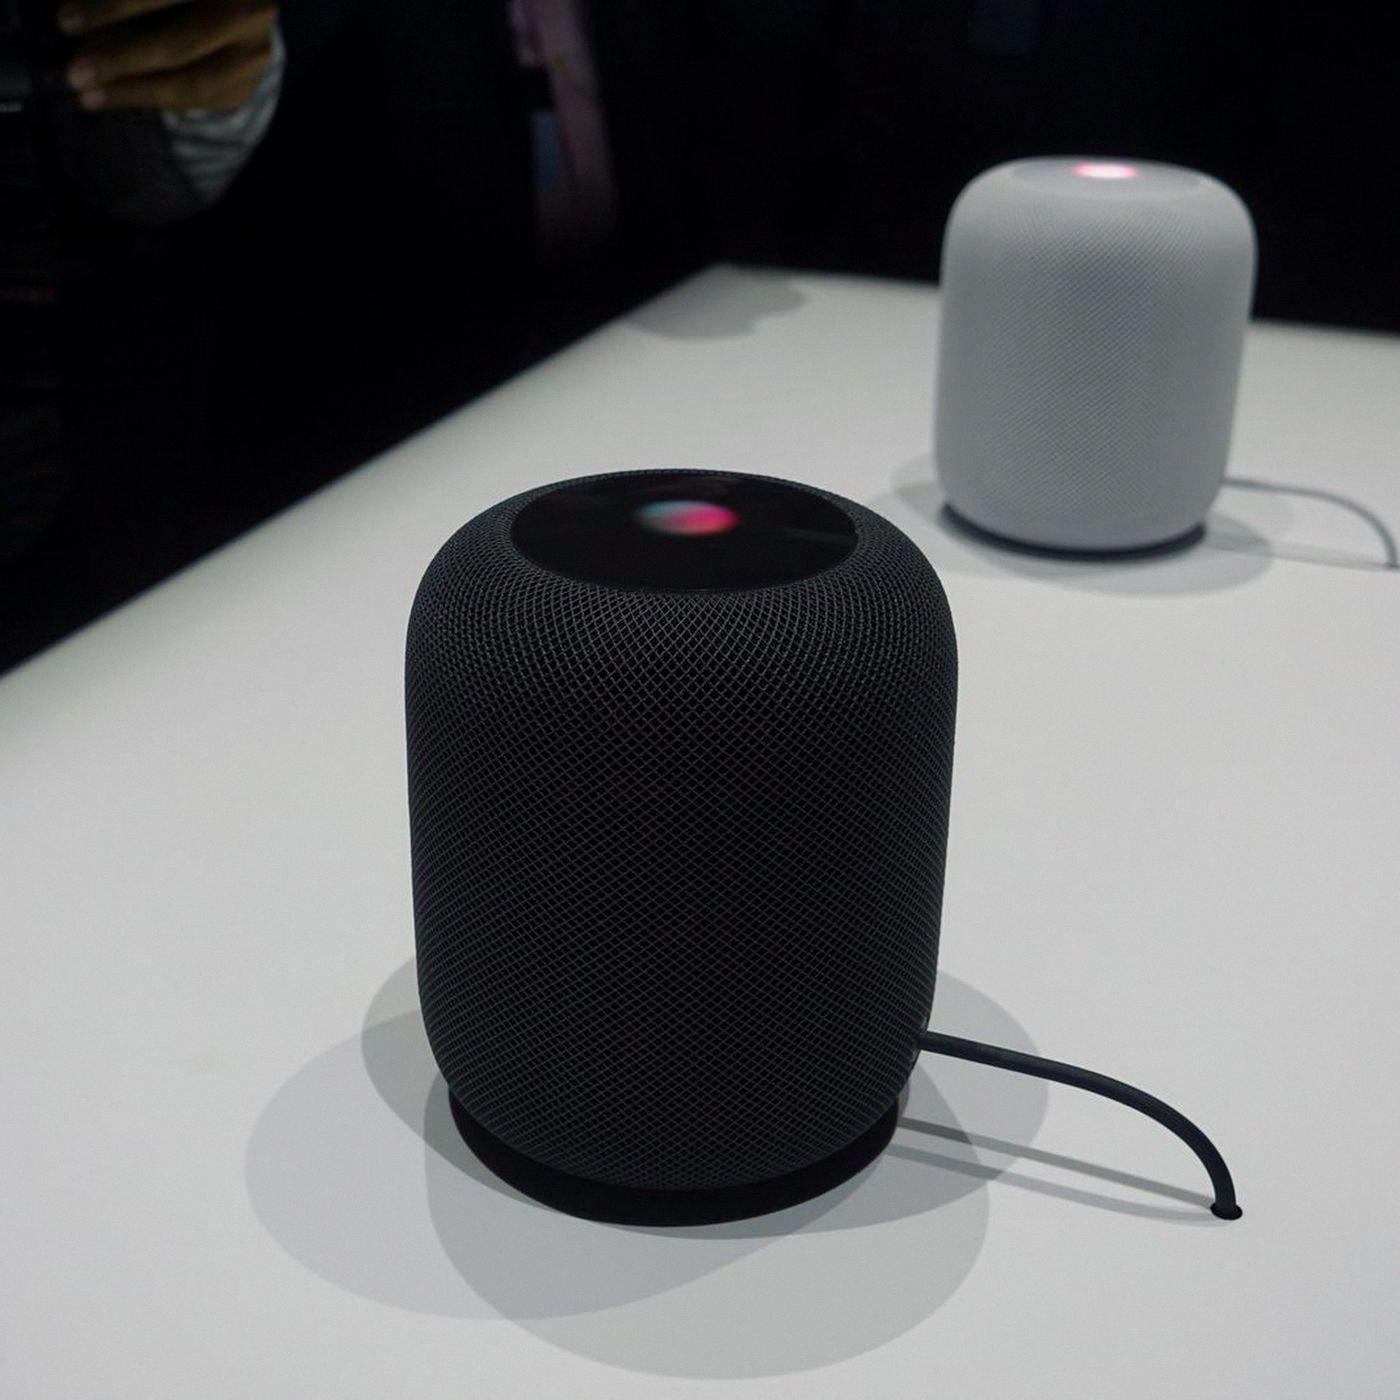 how to airplay on homepod